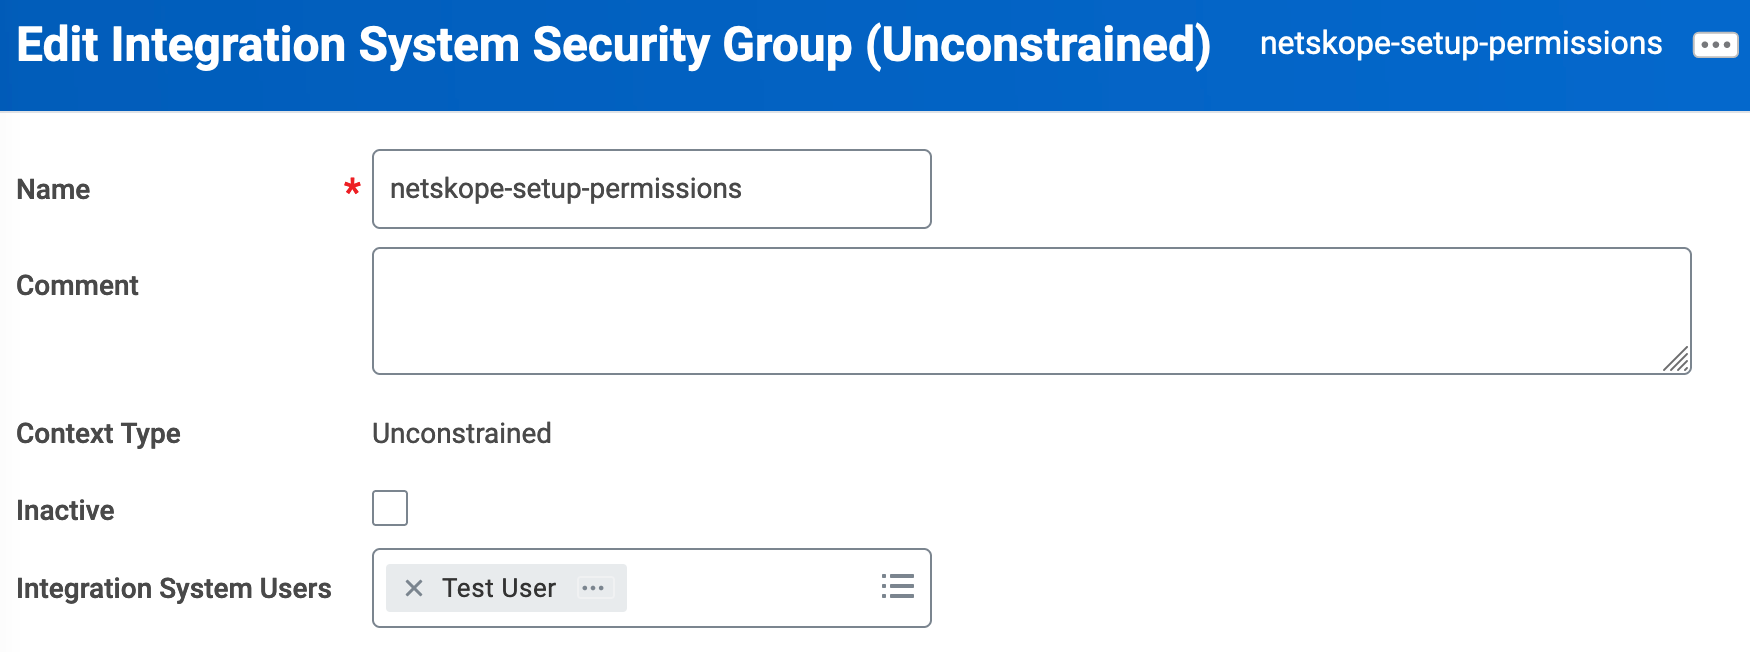 Workday_Edit-Integration-System-Security-Group.png